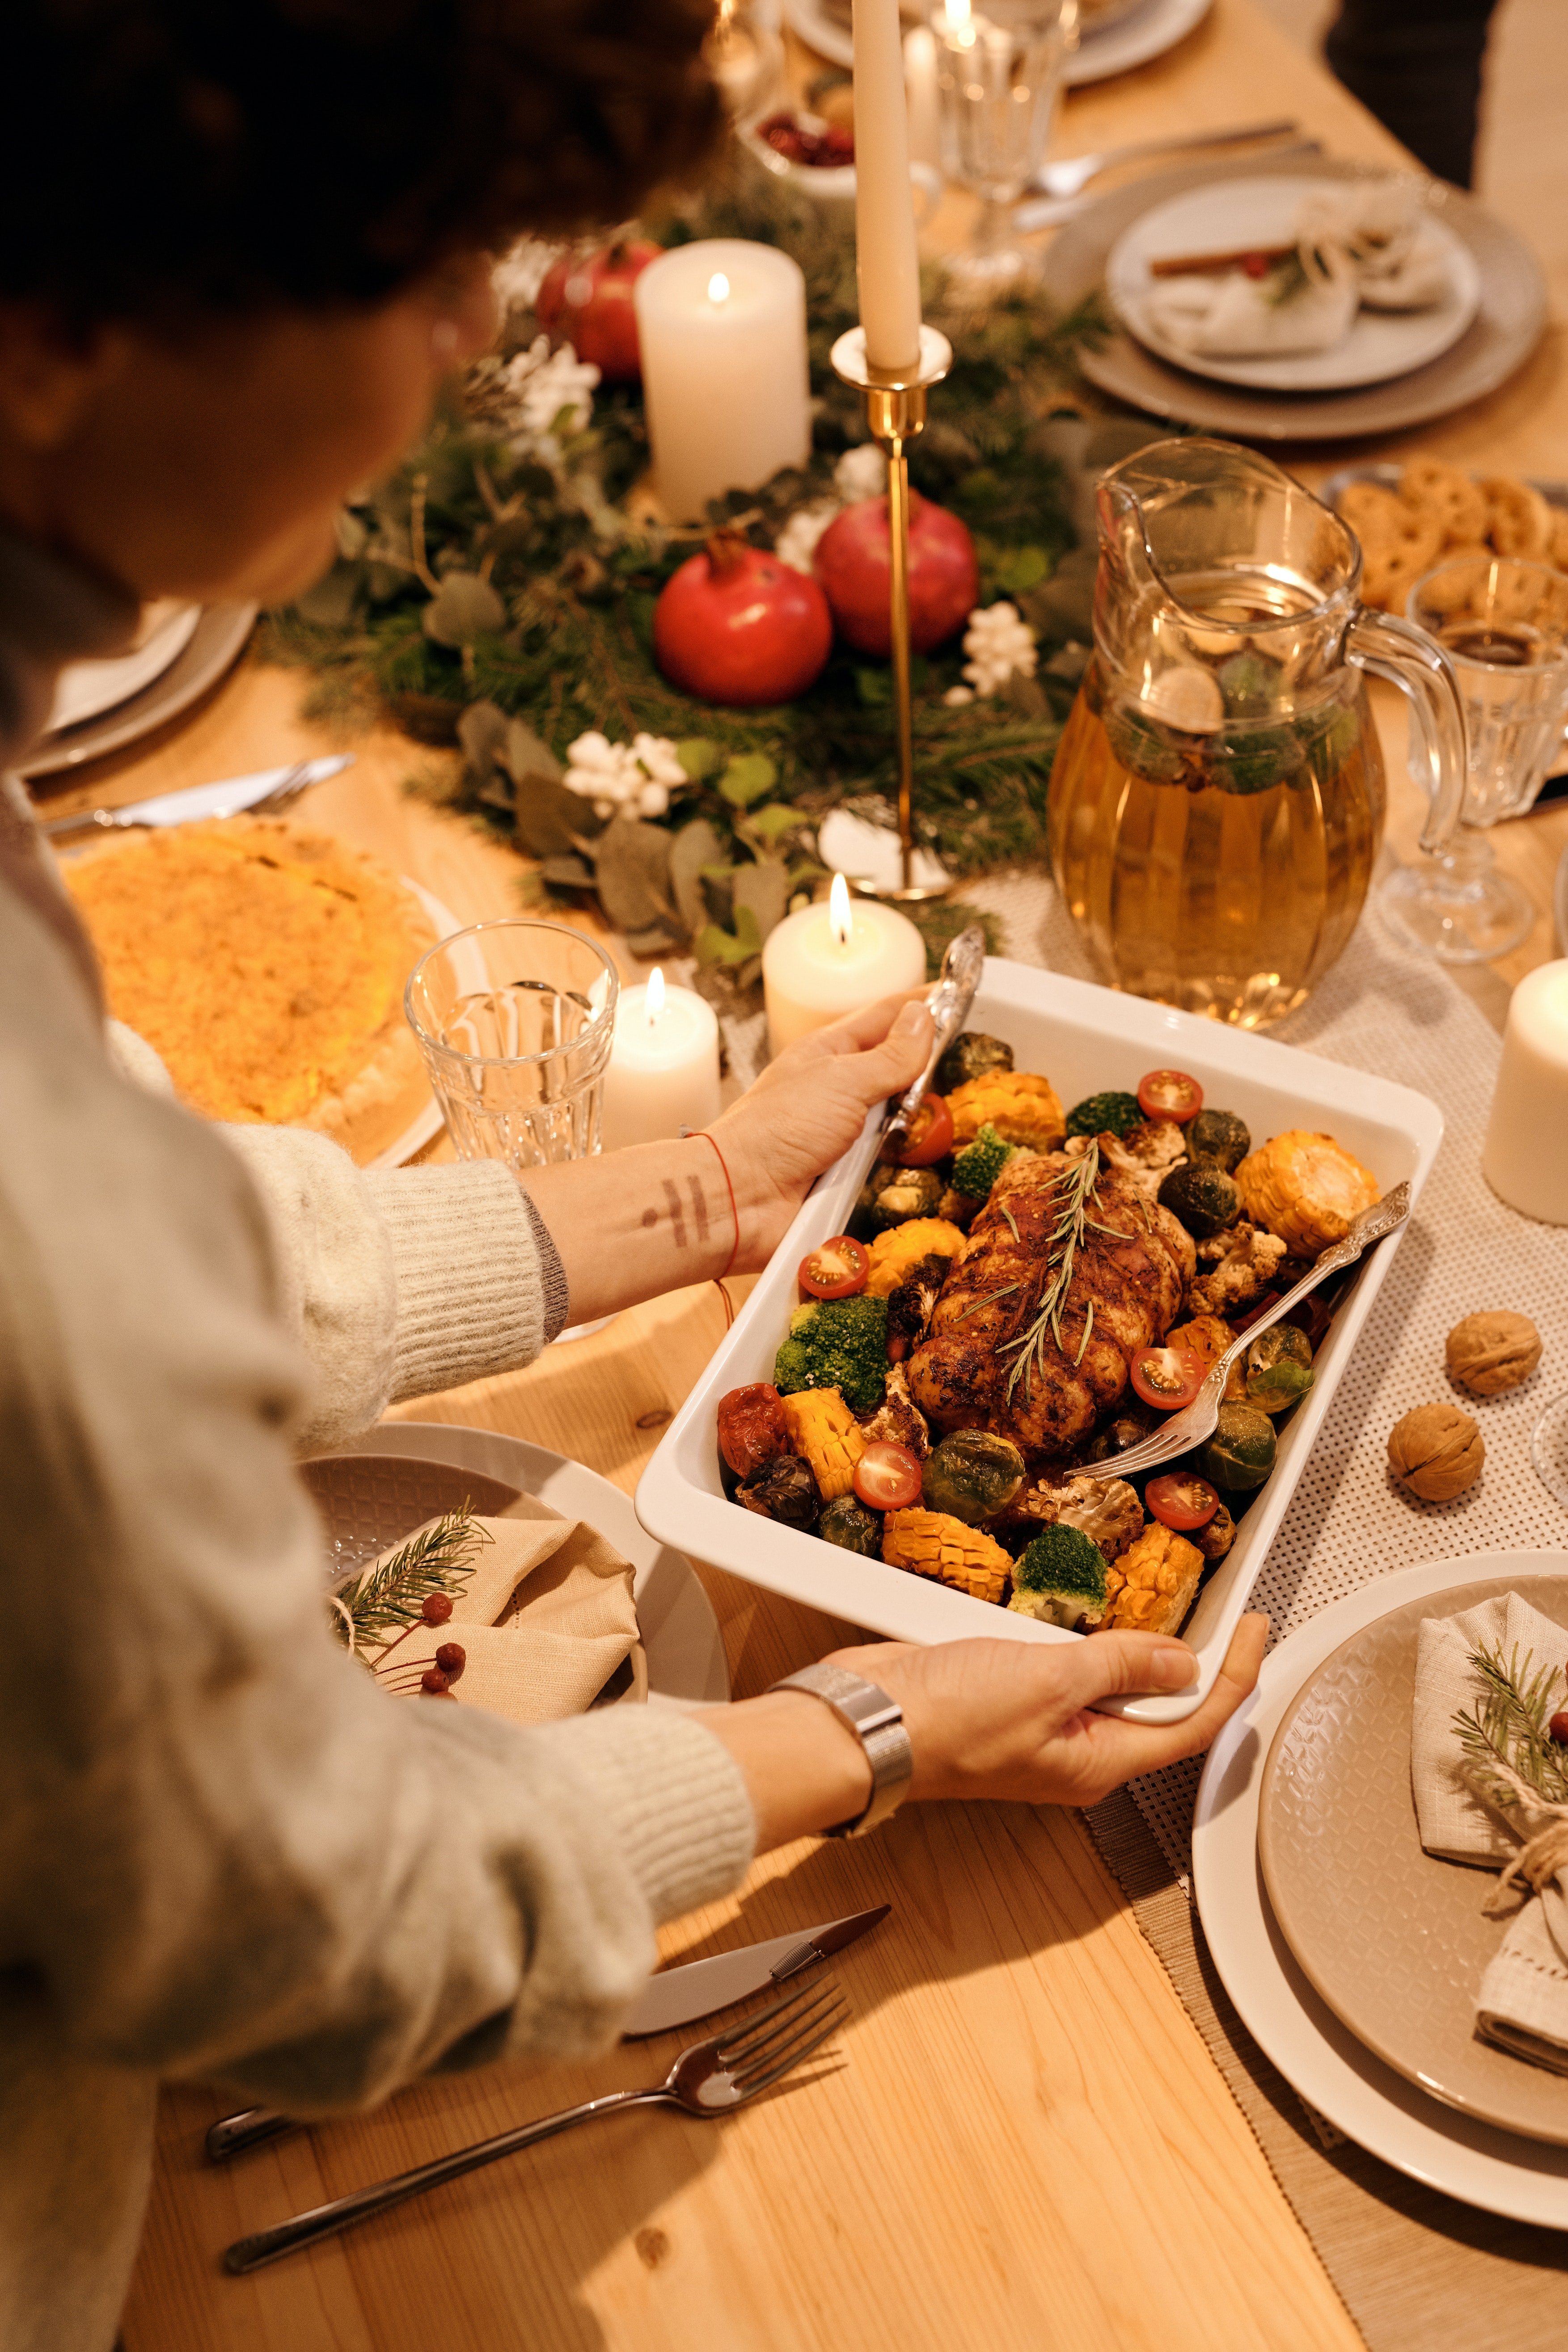 Robin's mother prepared a special Christmas dinner for everyone | Photo: Pexels